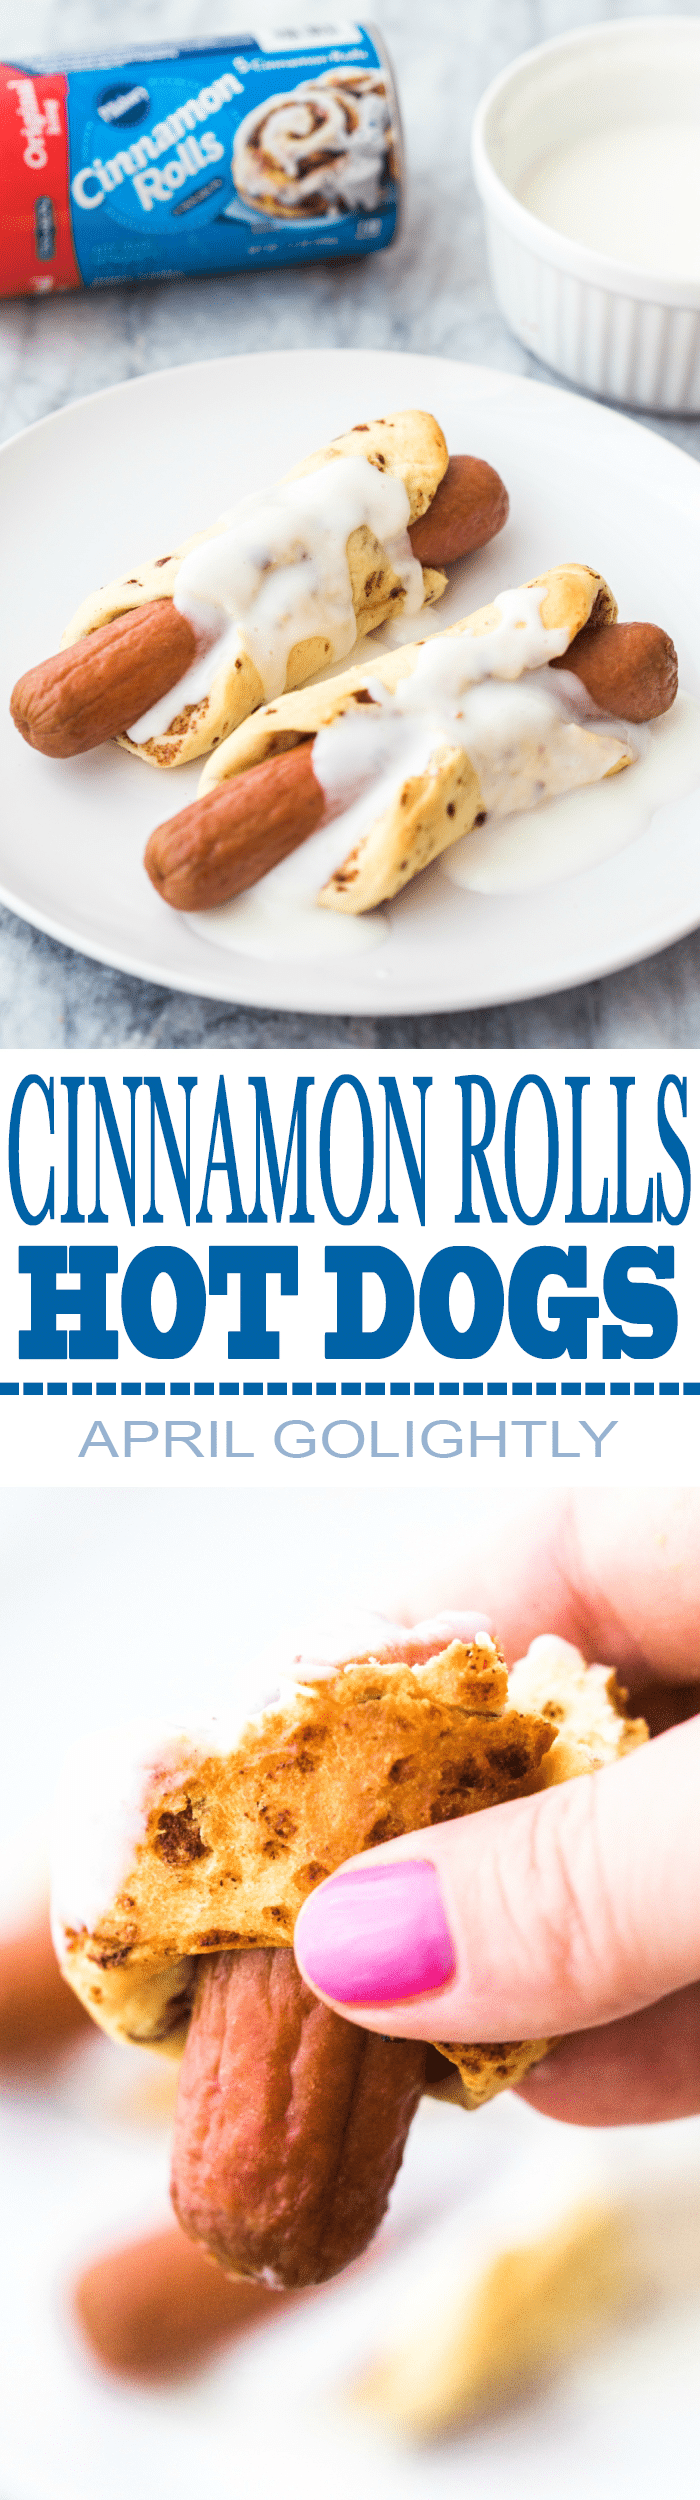 Cinnamon Roll Hot Dog with Yogurt Frosting Dip easy to make dinner recipe that kids love that is made with Pillsbury Cinnamon Rolls with Original Icing